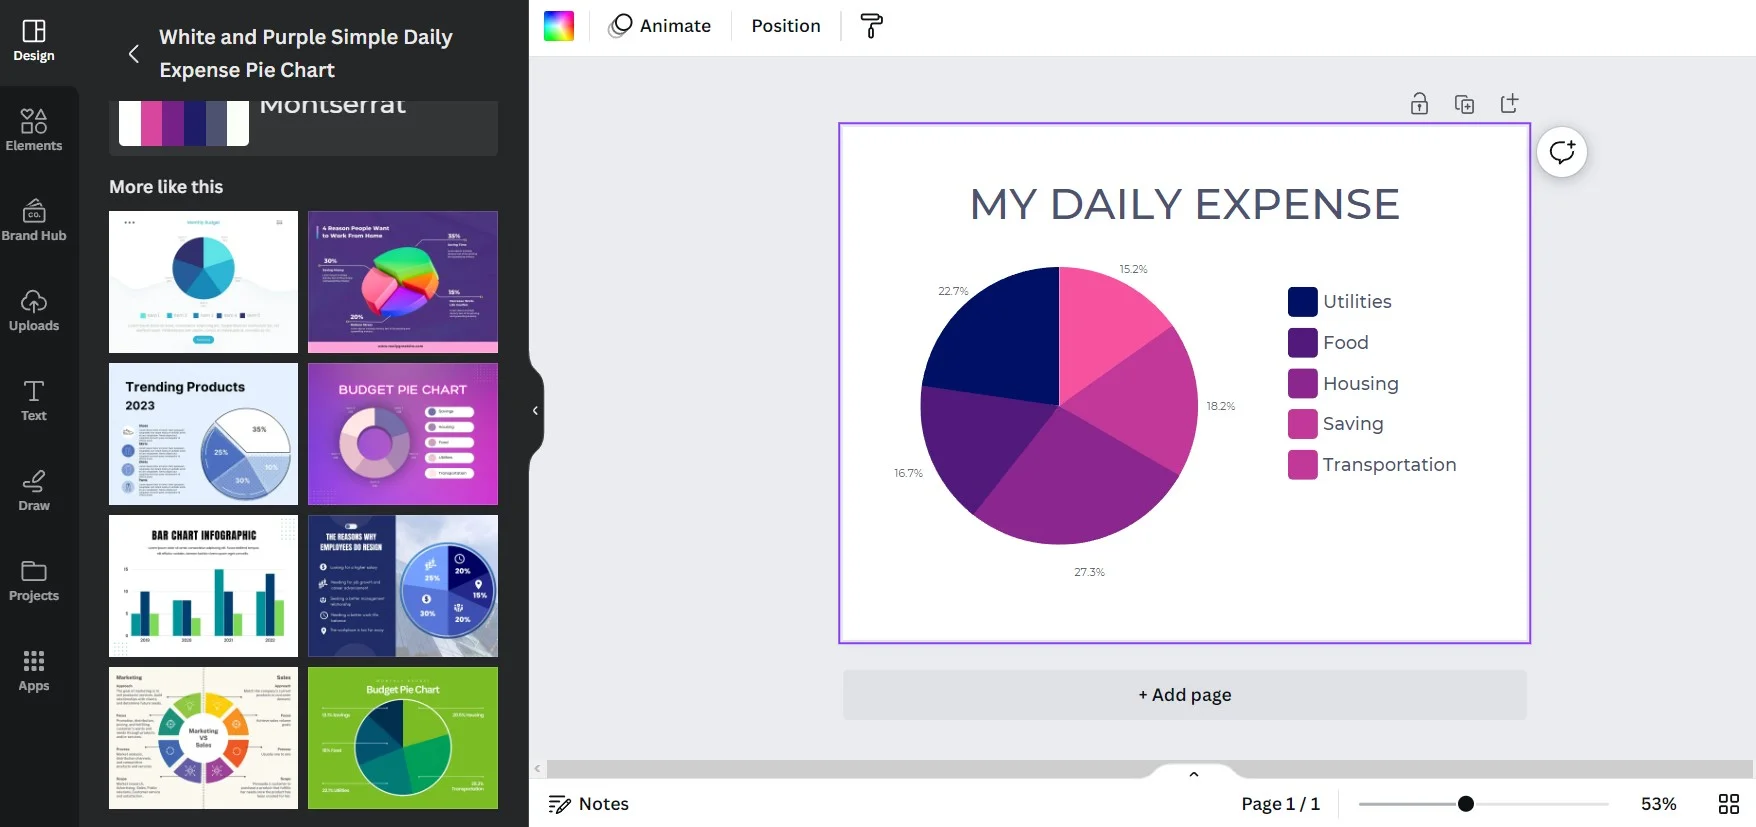 Creating charts in Canva is also easy